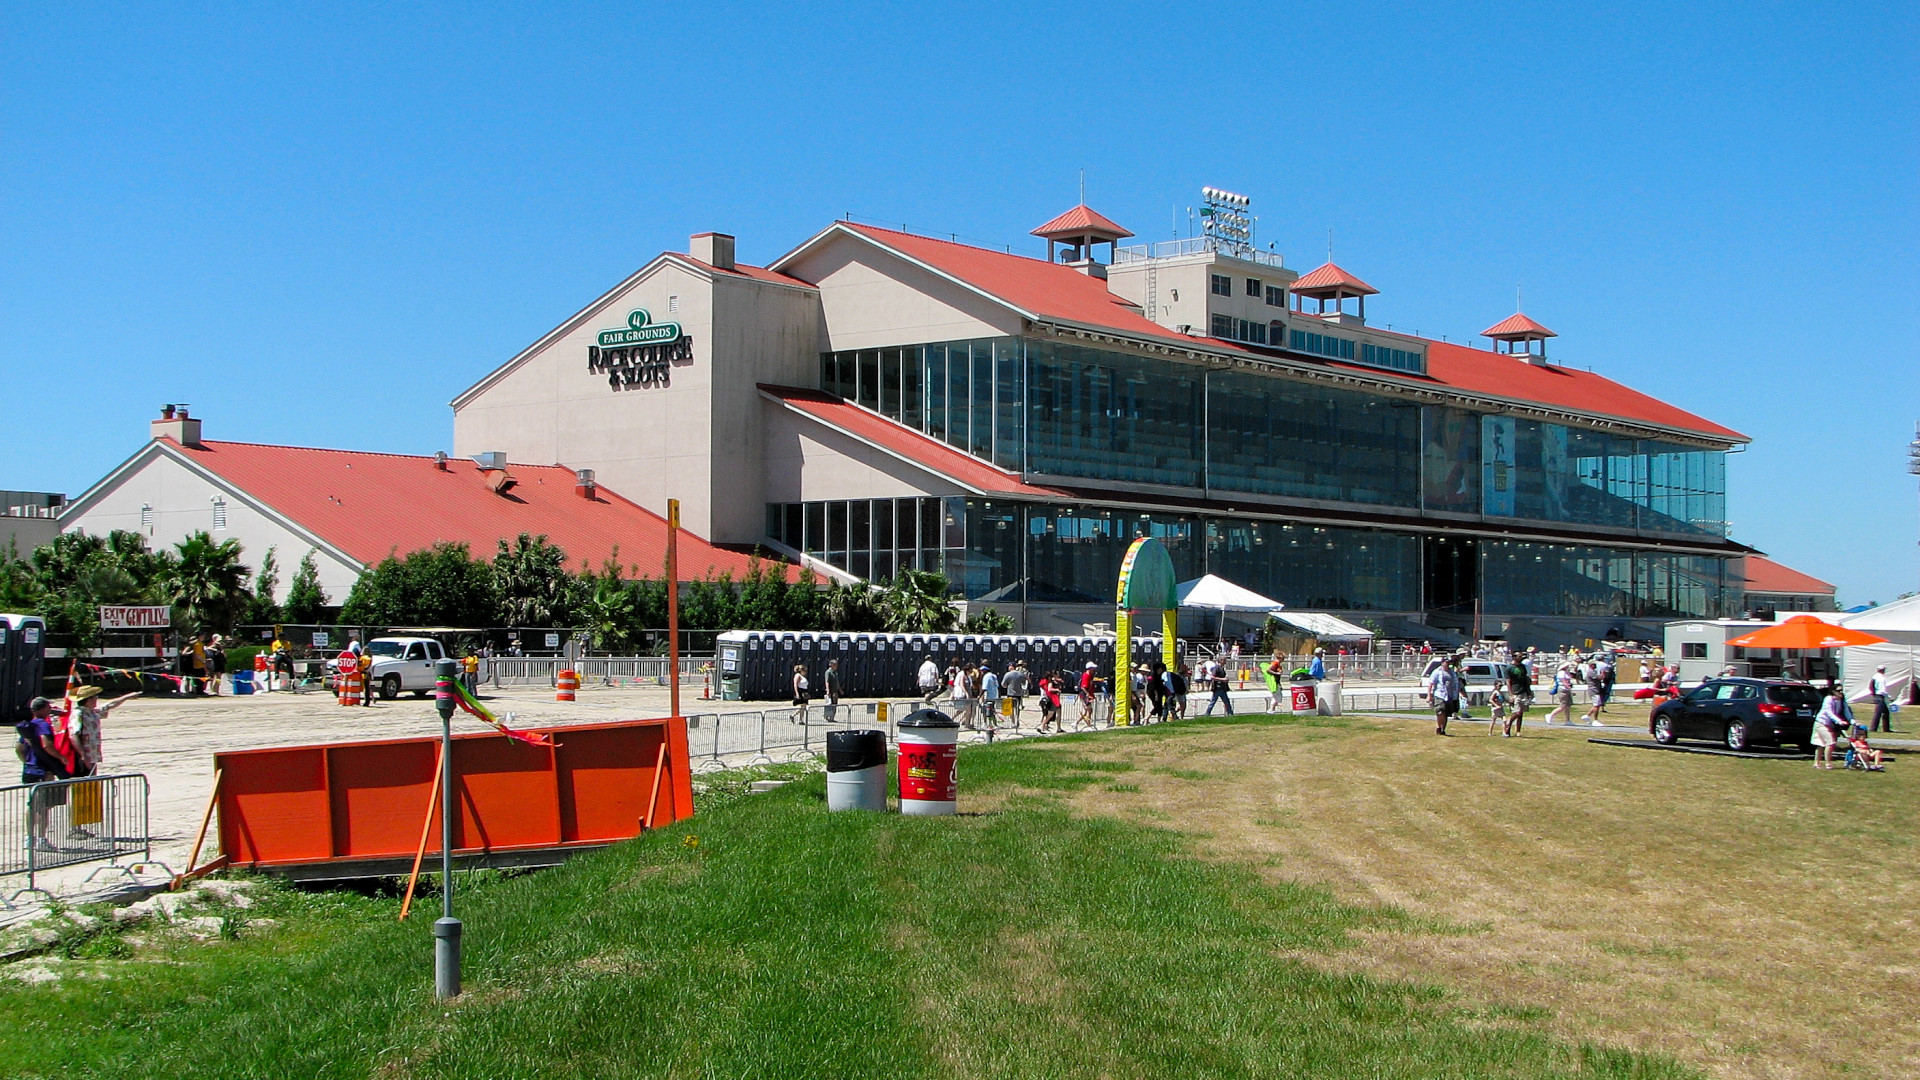 The Fairgrounds grandstand